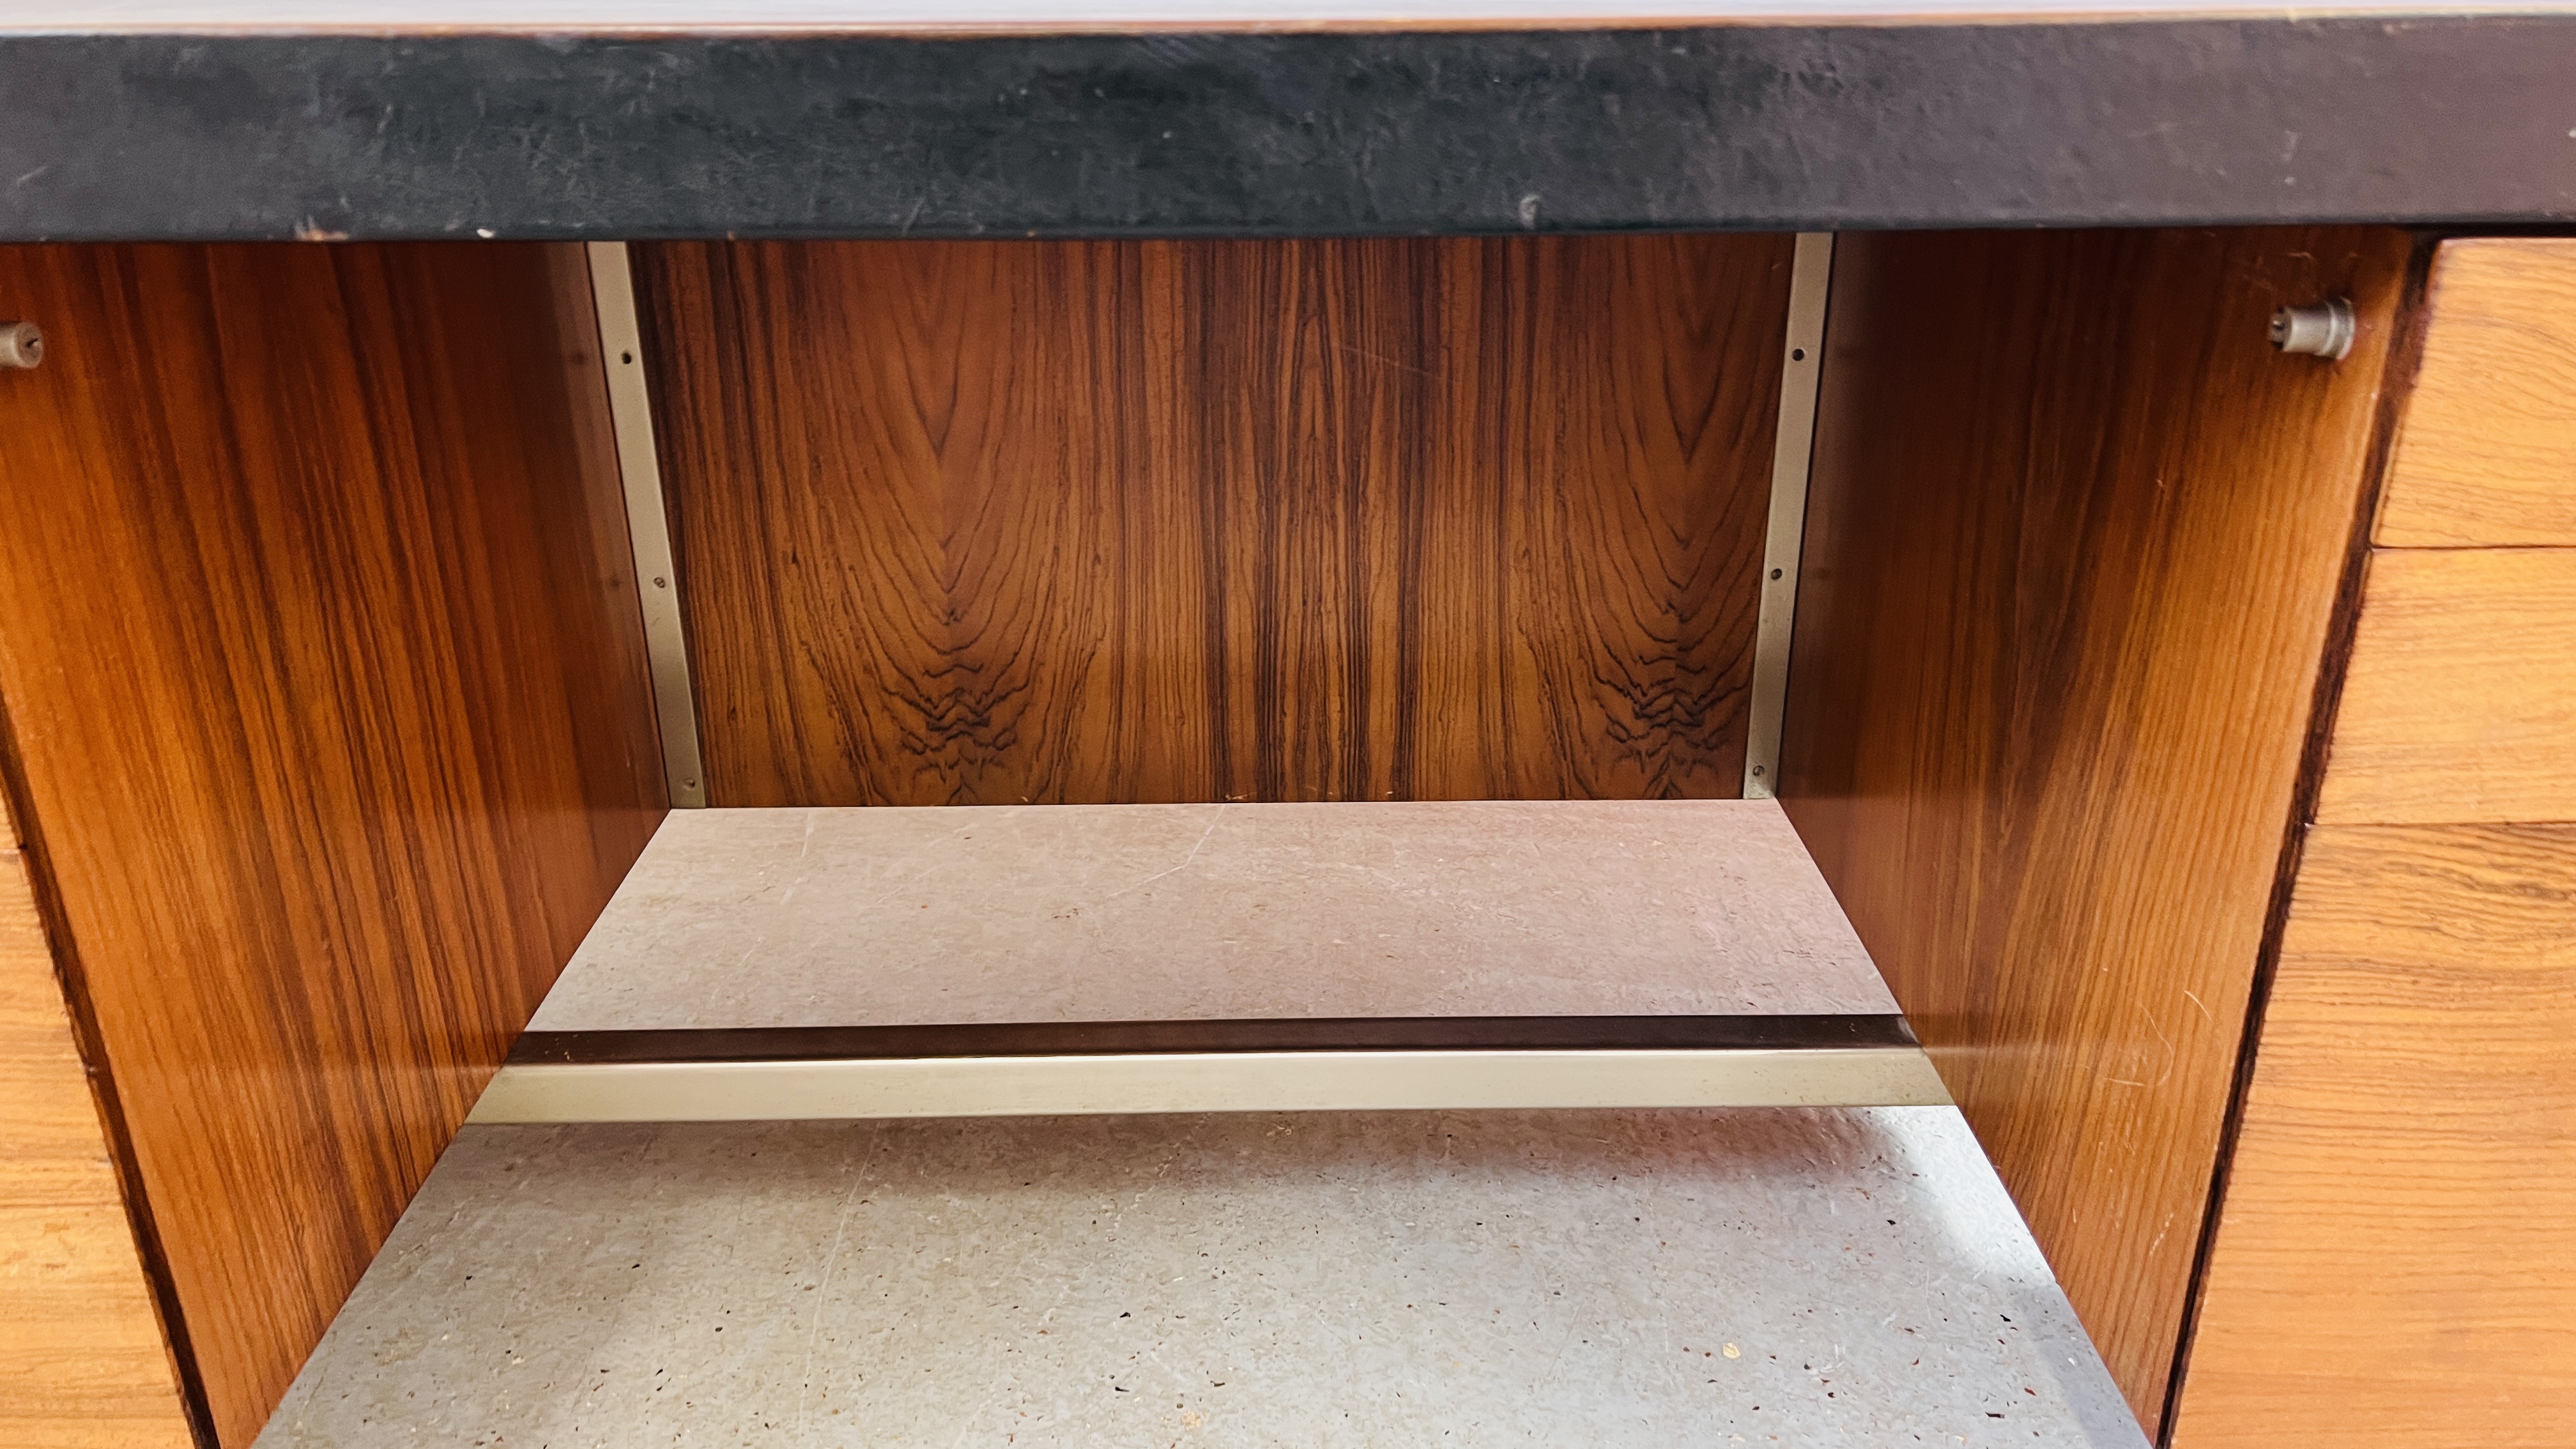 A MID C20TH SEVEN DRAWER DESK - L 183CM X D 92CM X H 73CM. - Image 6 of 11